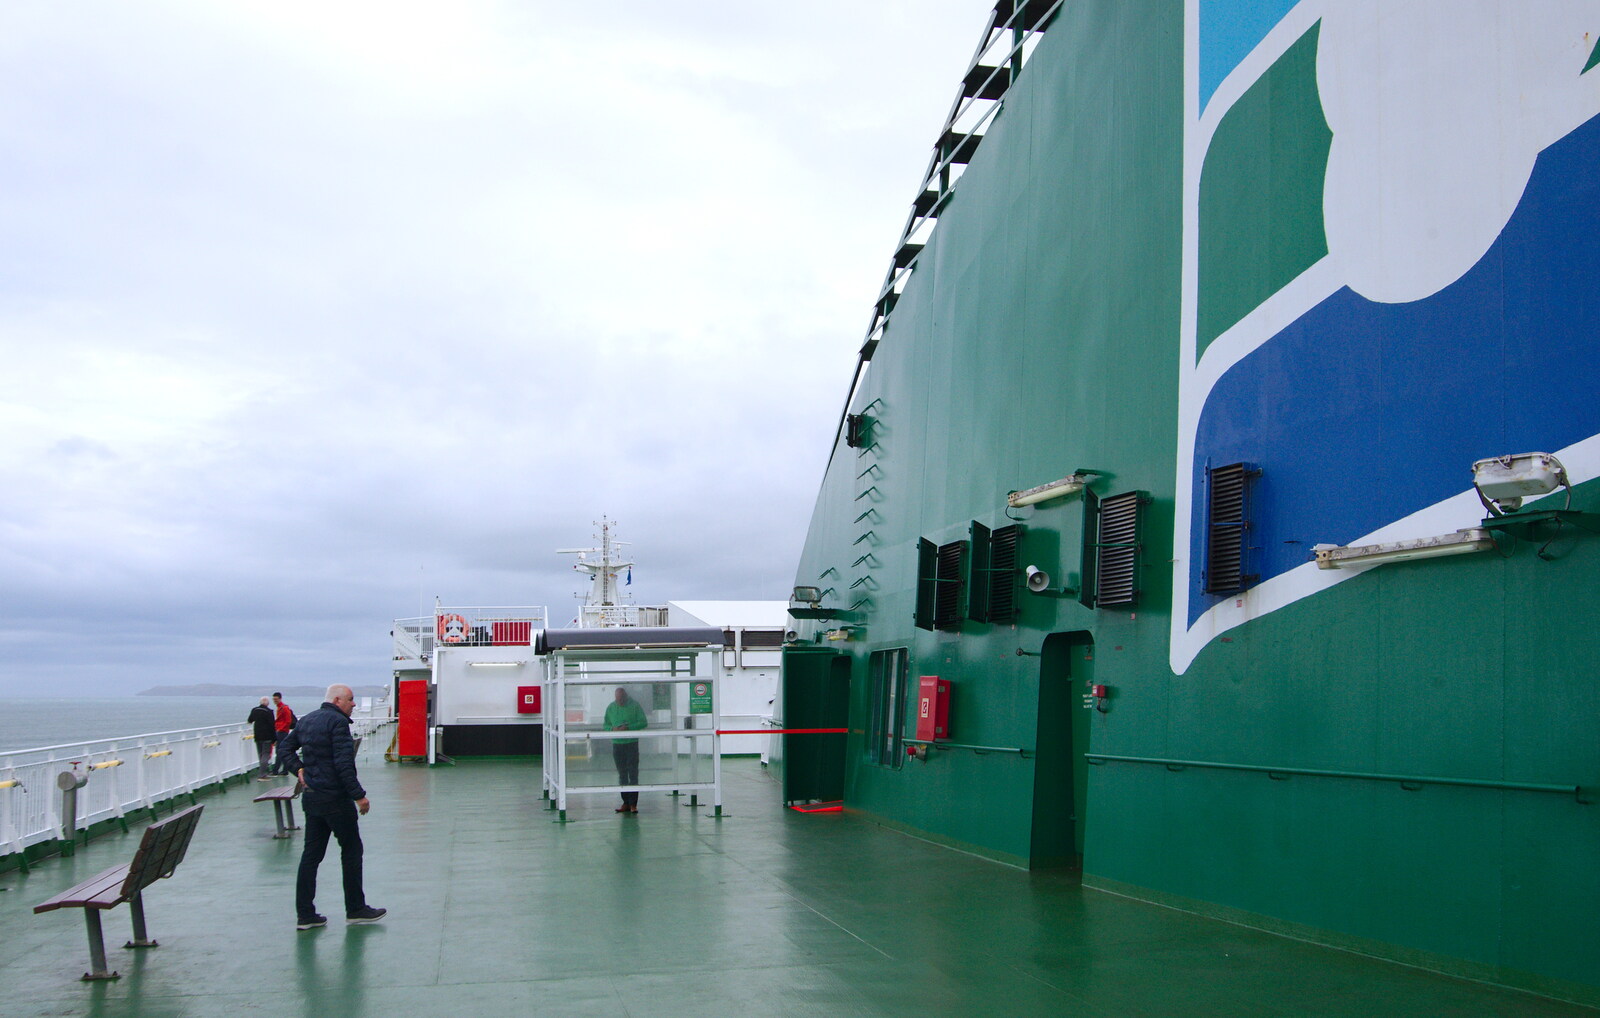 The huge wall of funnel on the ferry from The Summer Trip to Ireland, Monkstown, Co. Dublin, Ireland - 9th August 2019